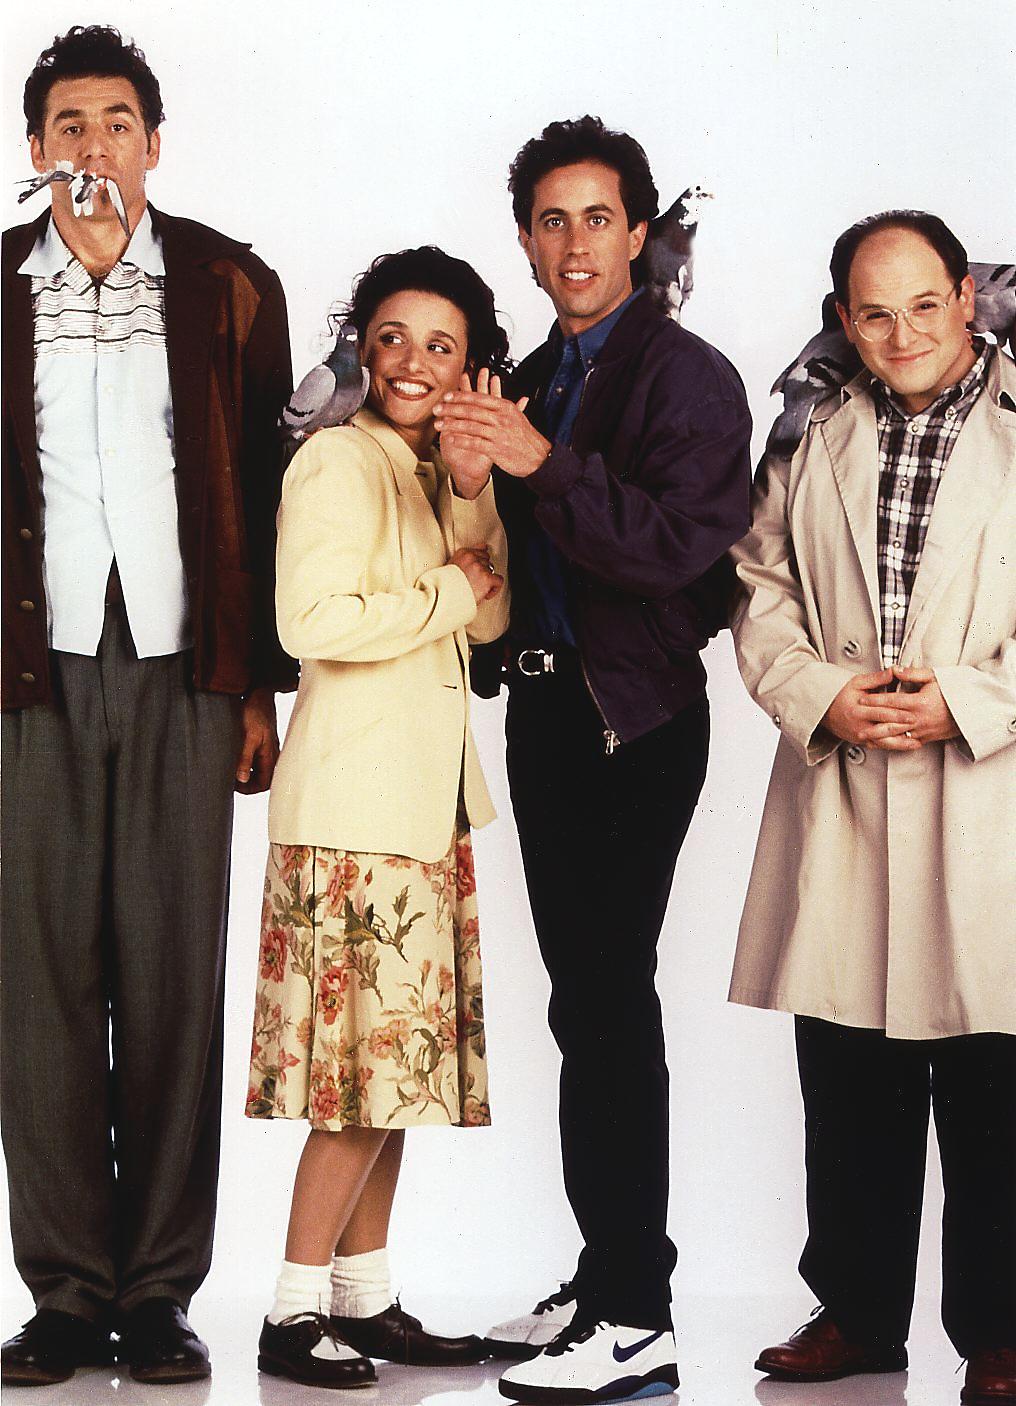 The cast of "Seinfeld" poses for a promotional photo, 1998 | Photo: Getty Images 